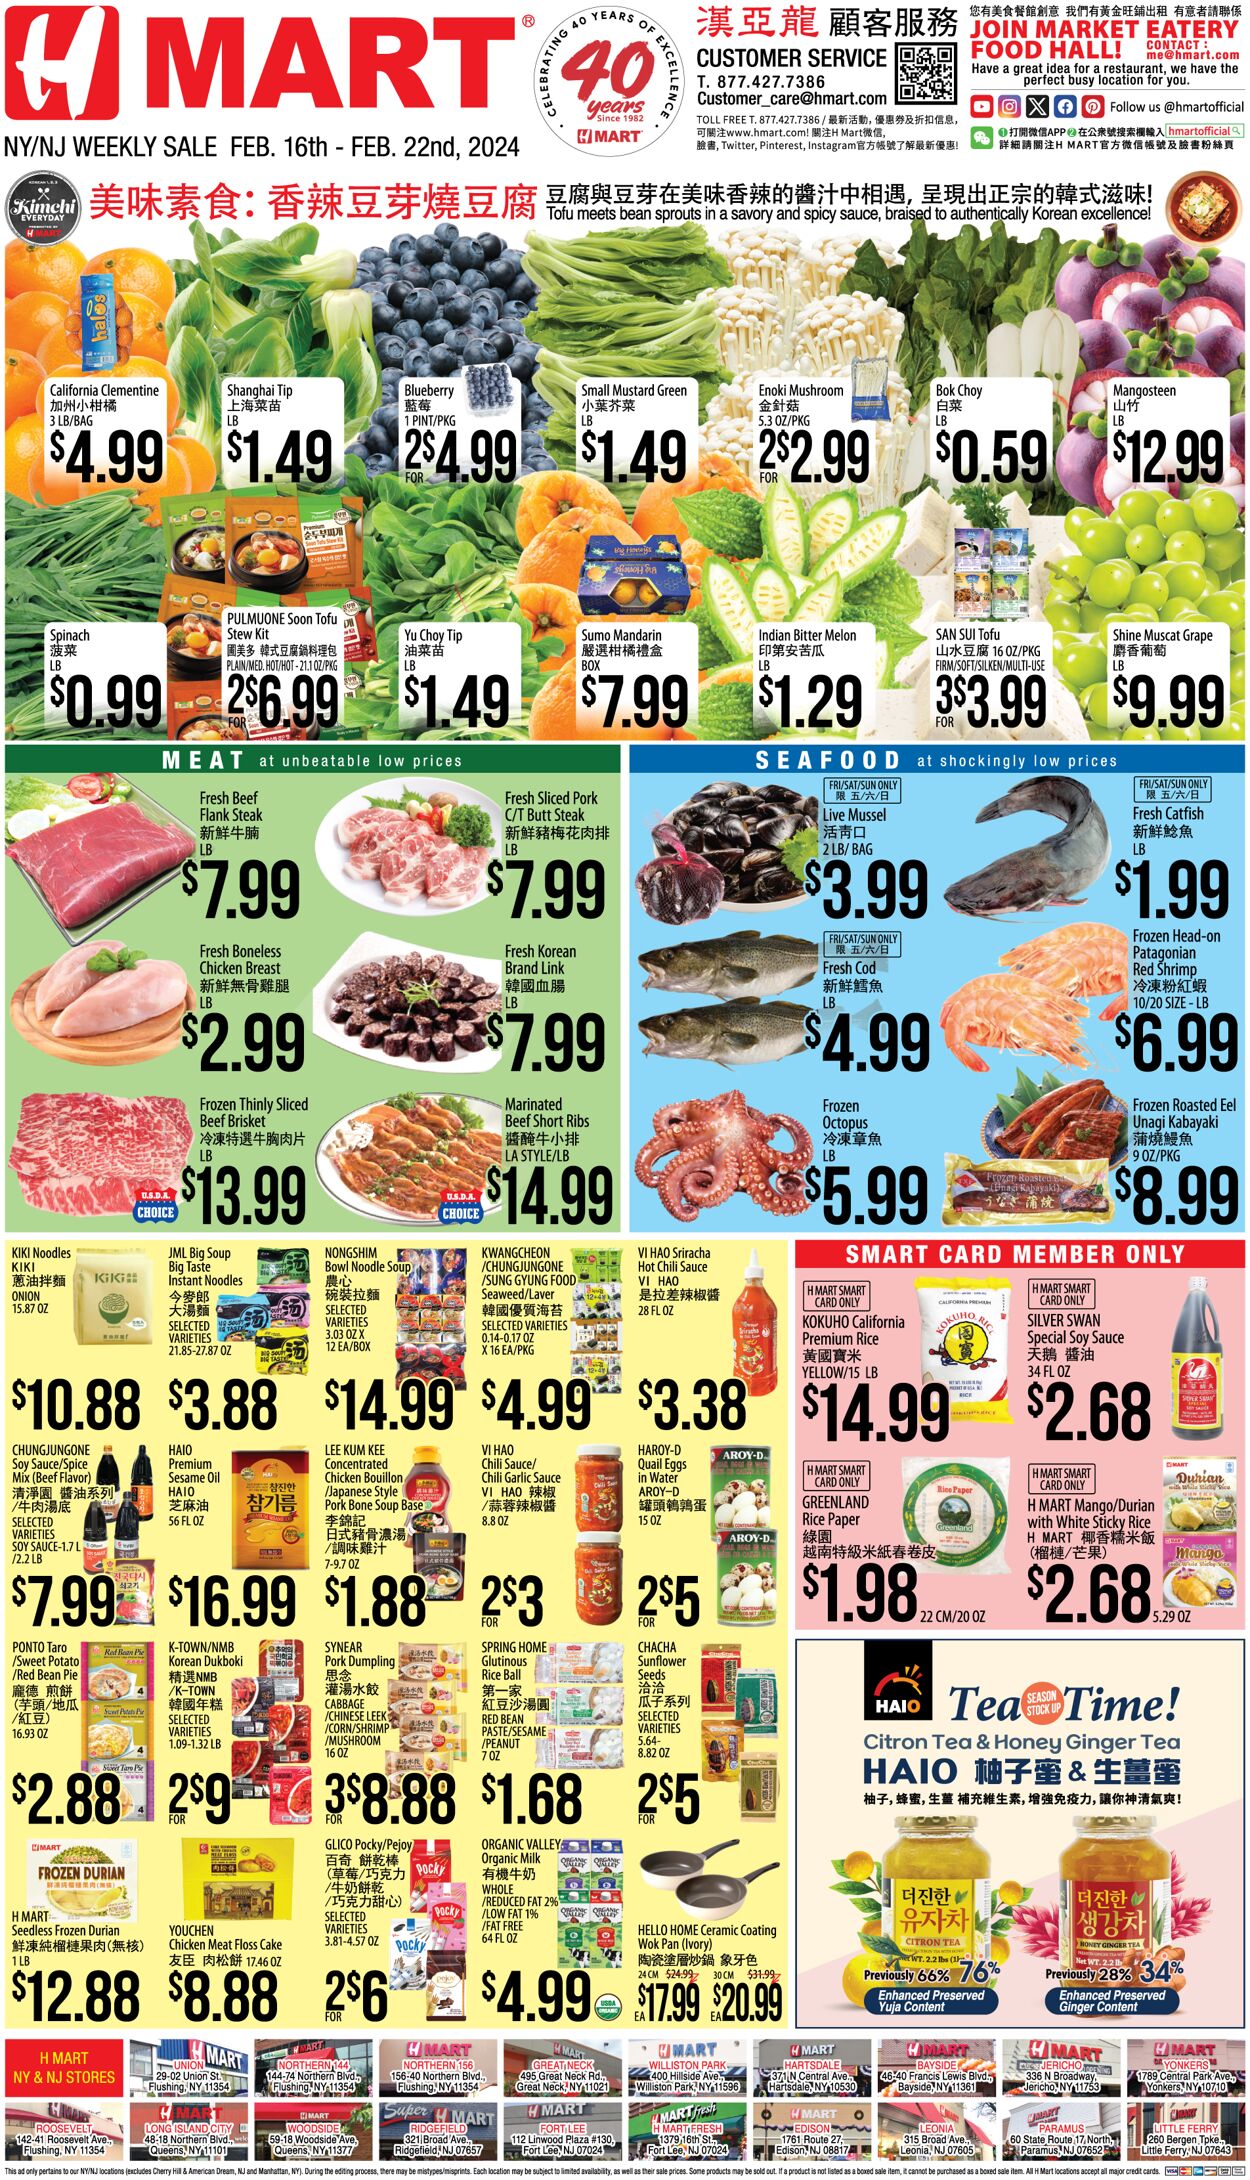 H-Mart Promotional weekly ads